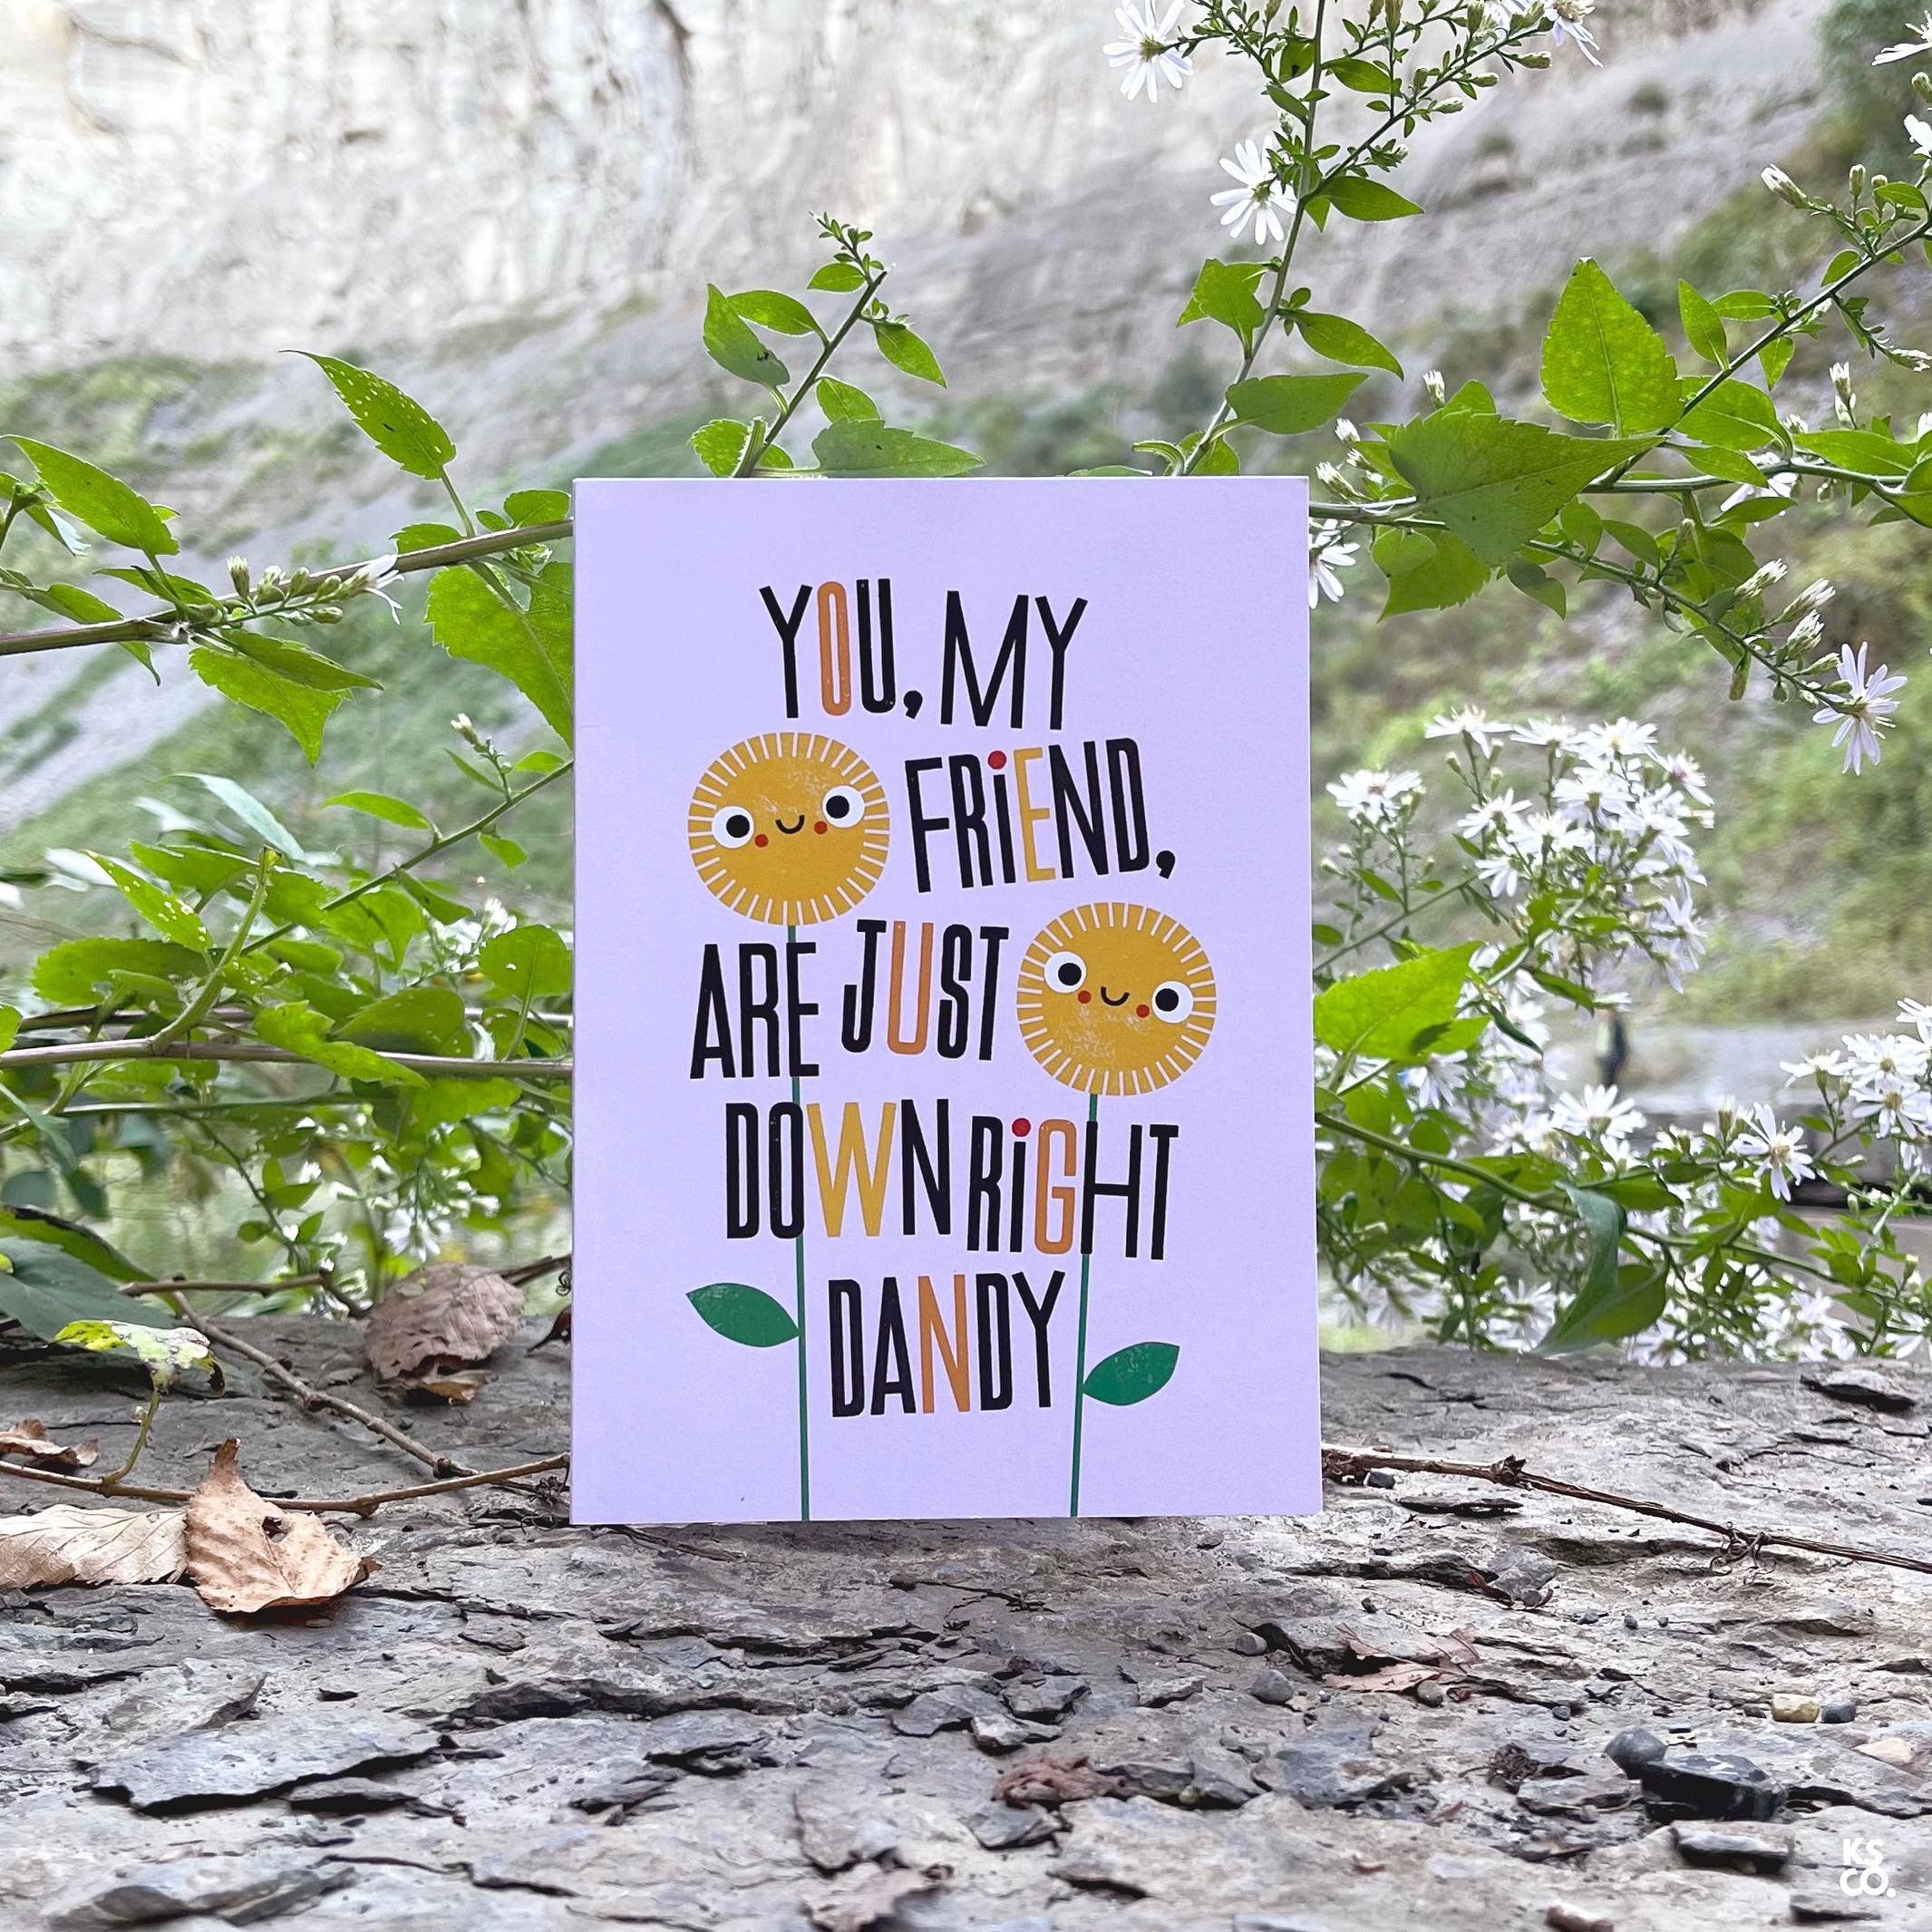 A downright dandy folded piece of paper to tell your best bud you&rsquo;re glad to be friends😊
〰️〰️〰️
Our biggest sale of the year ends on May 1!
〰️〰️〰️
#katesmithco #makinghumanssmile #bestbud #greetingcards